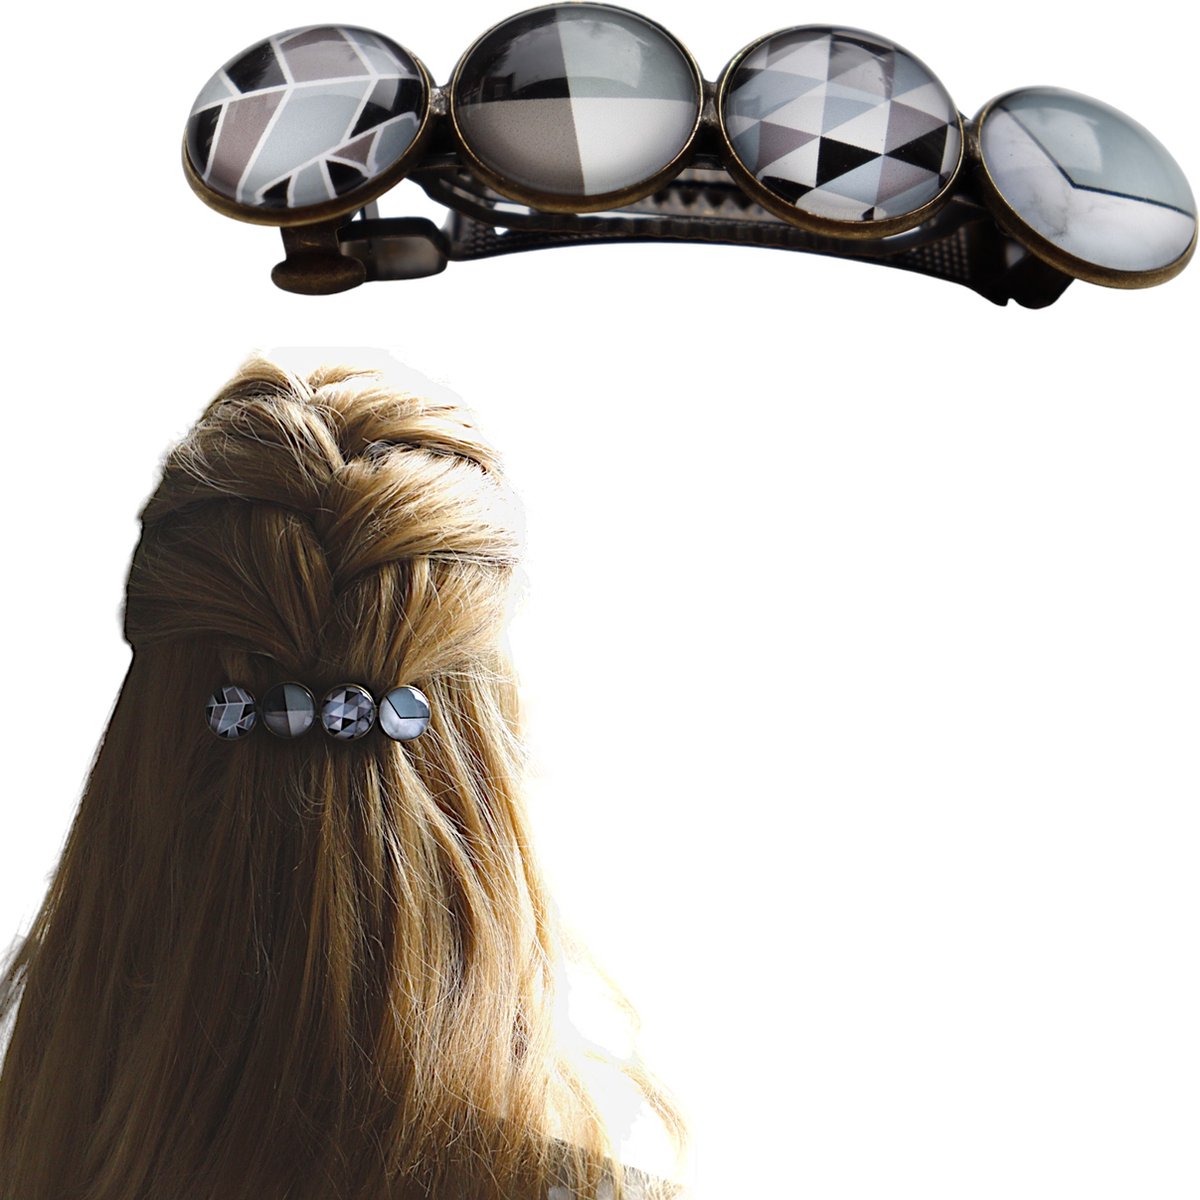 Hairpin-Haarspeld-Color Hairclip- Cabochon- XL grijs-zwart-taupe